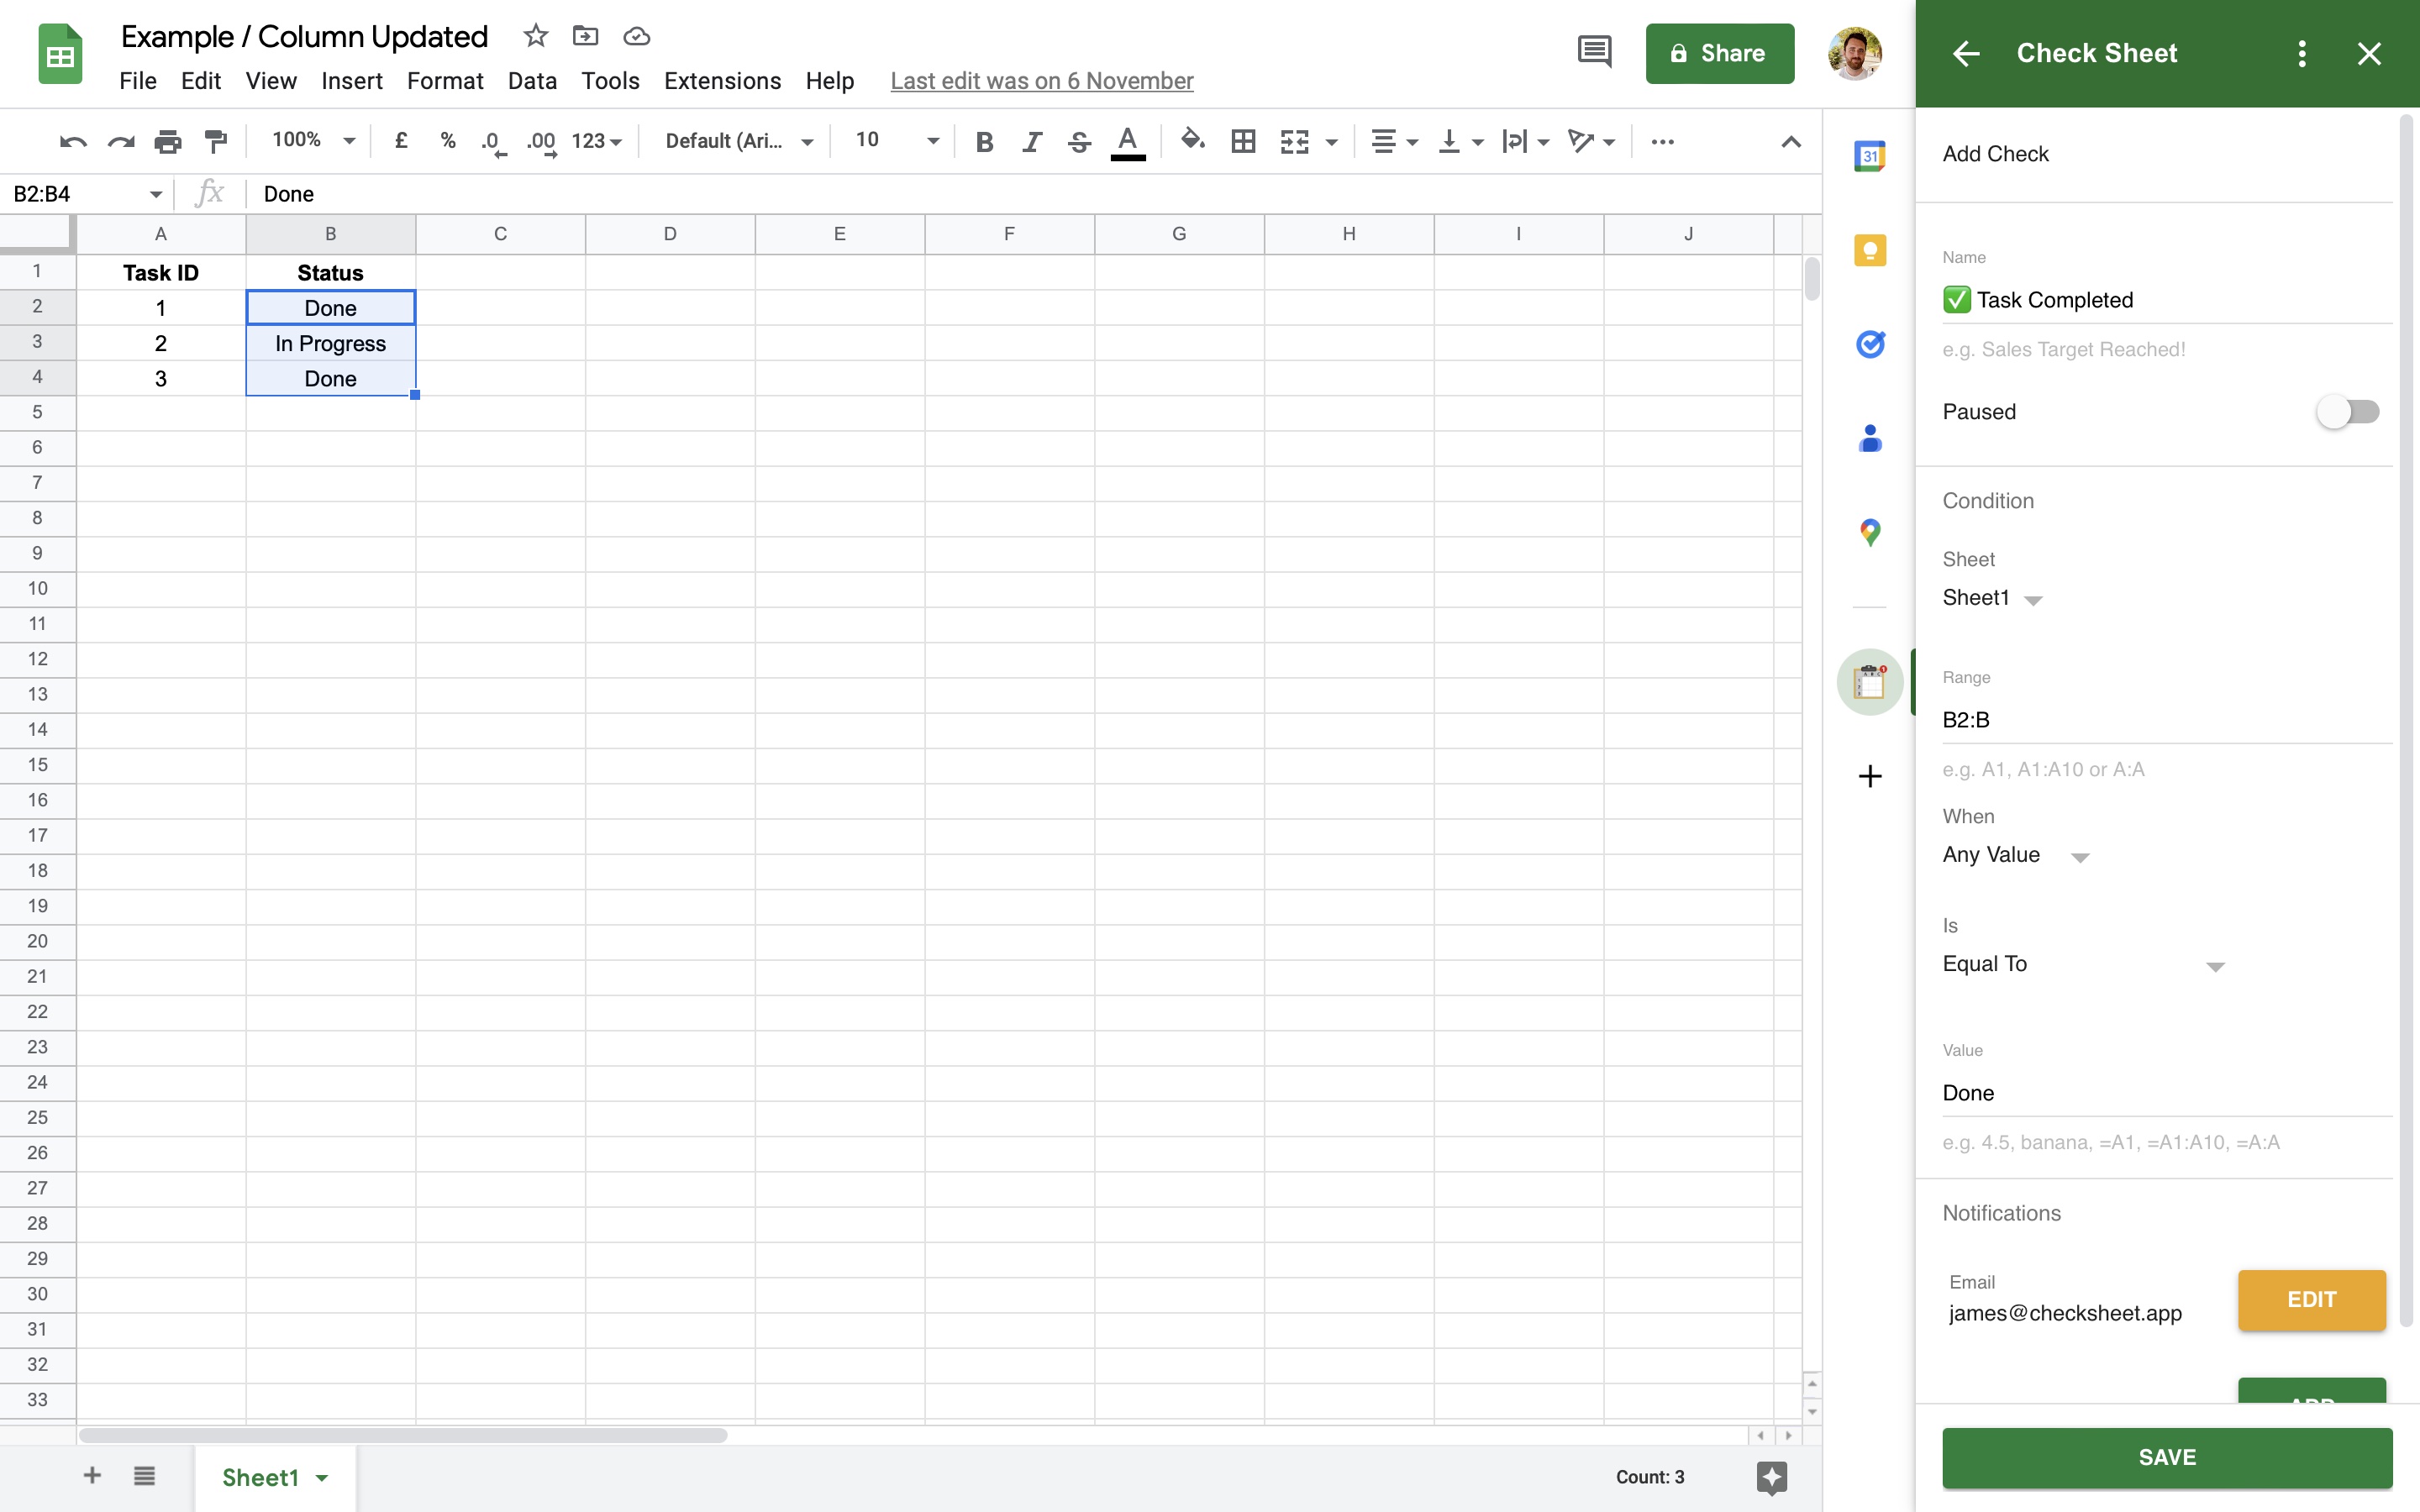 Screenshot showing a Google Sheet with a Check that sends a notification when a column is updated